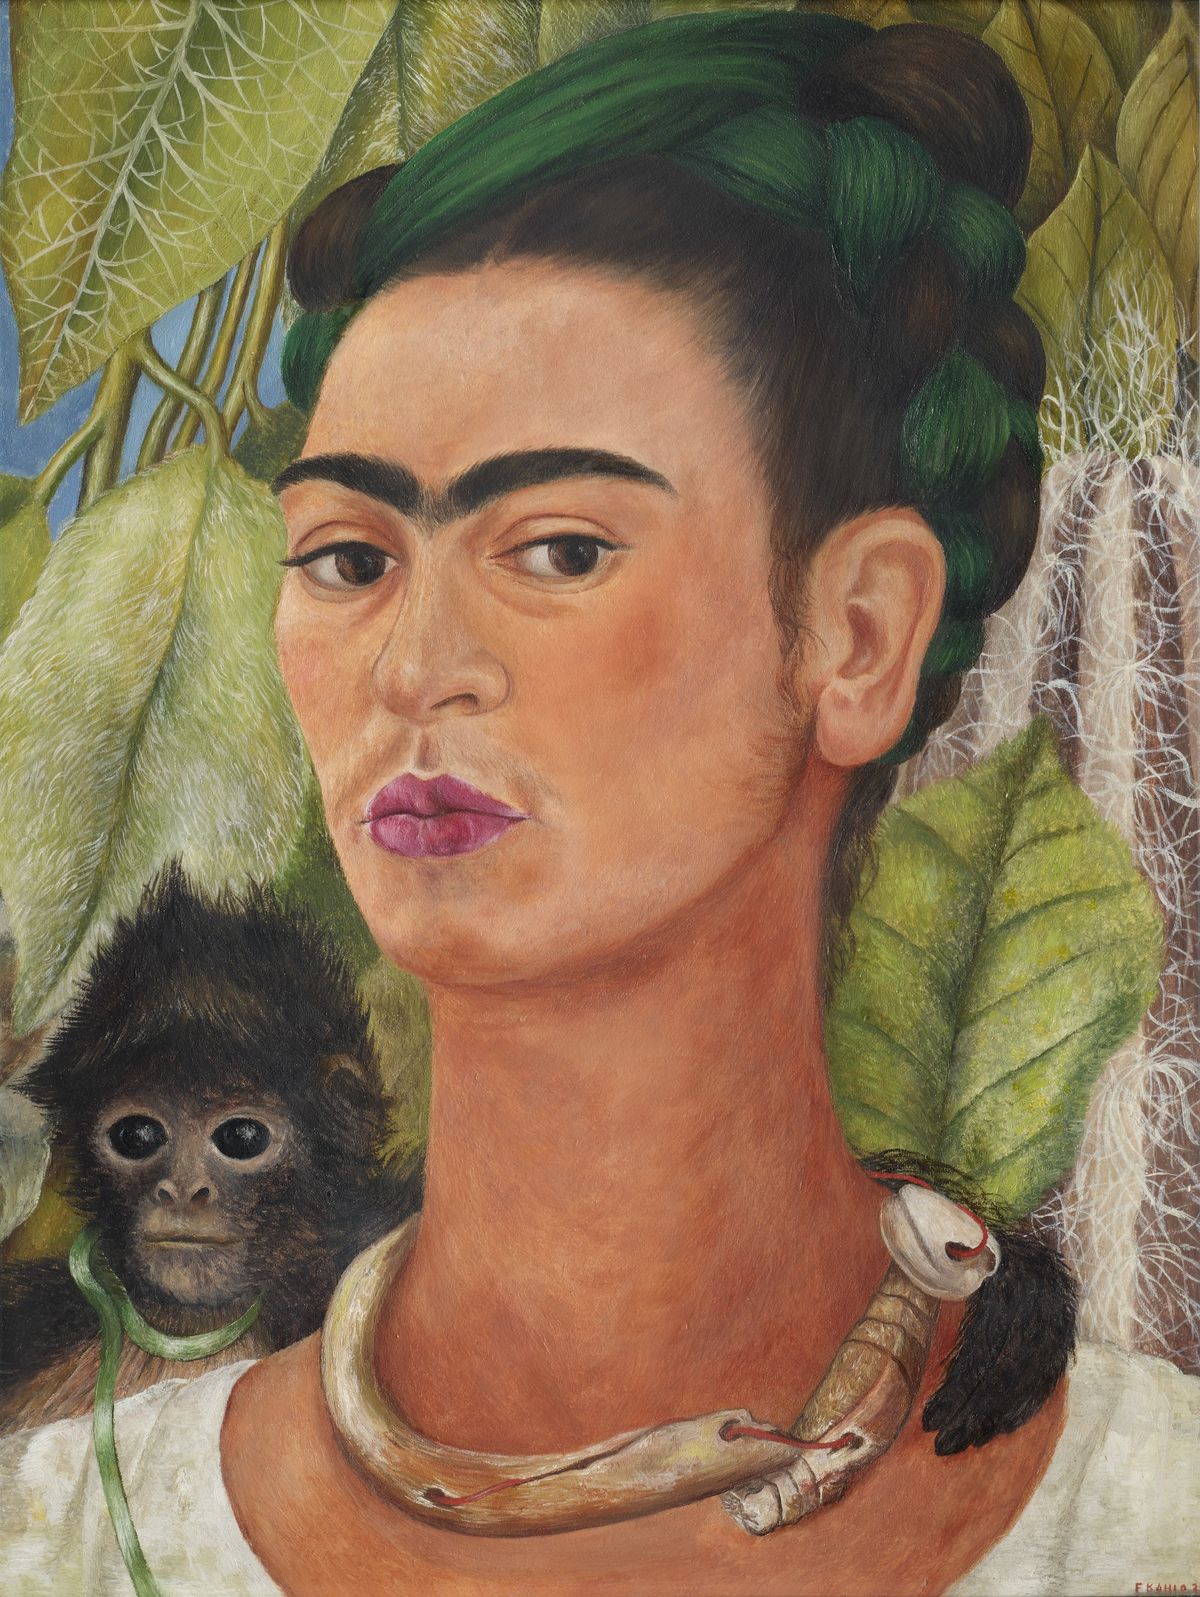 The Artwork That Changed My Life: Frida Kahlos Self-Portraits